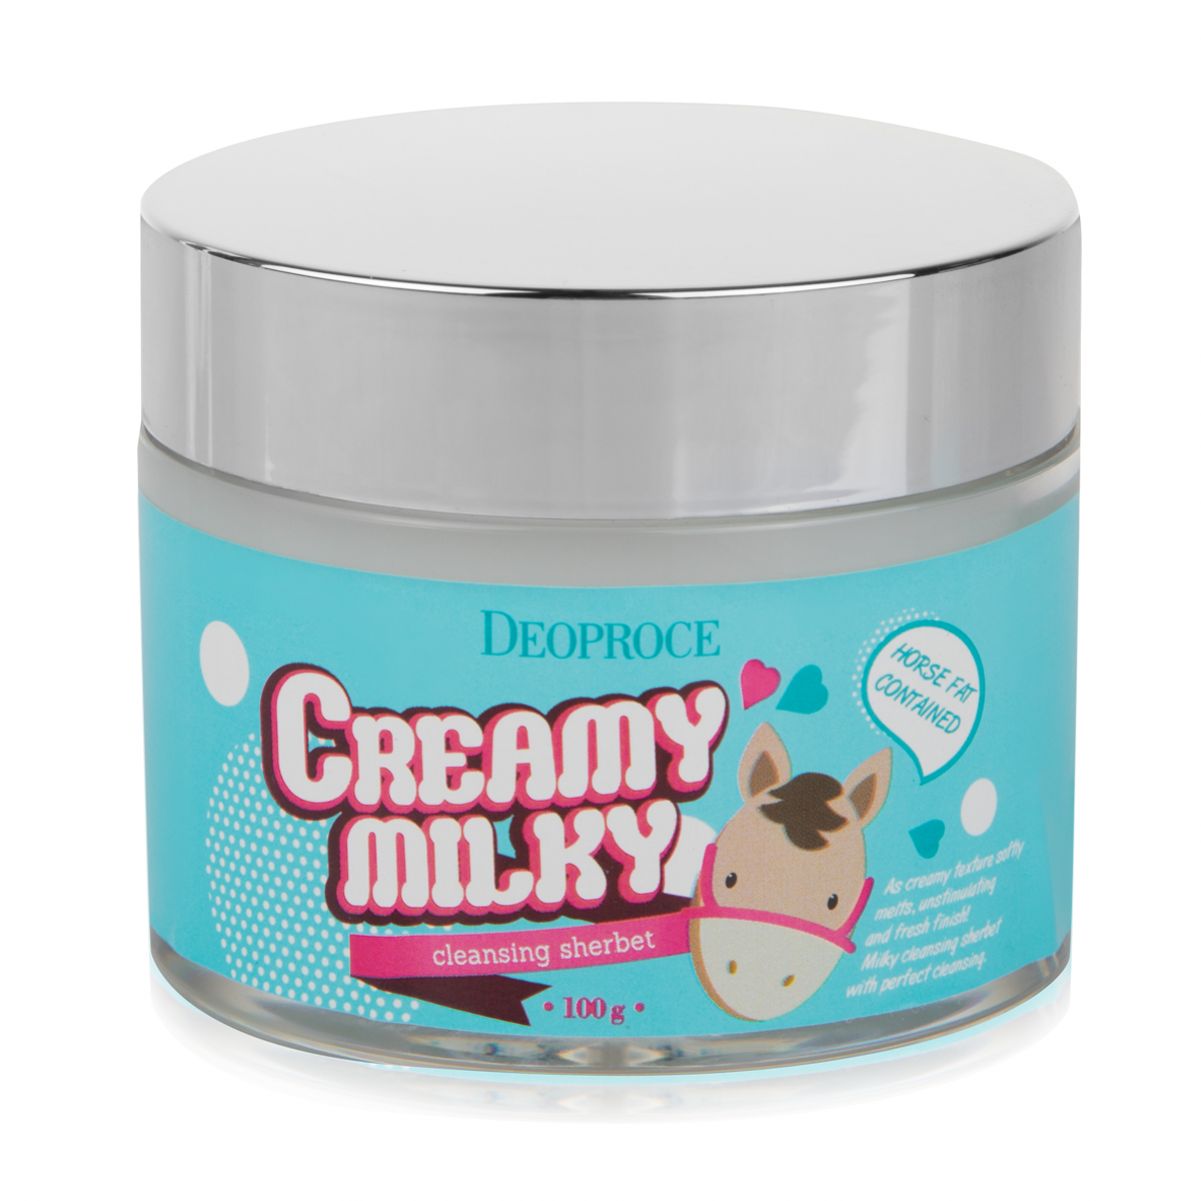 Deoproce Creamy Milky Cleansing Sherbet